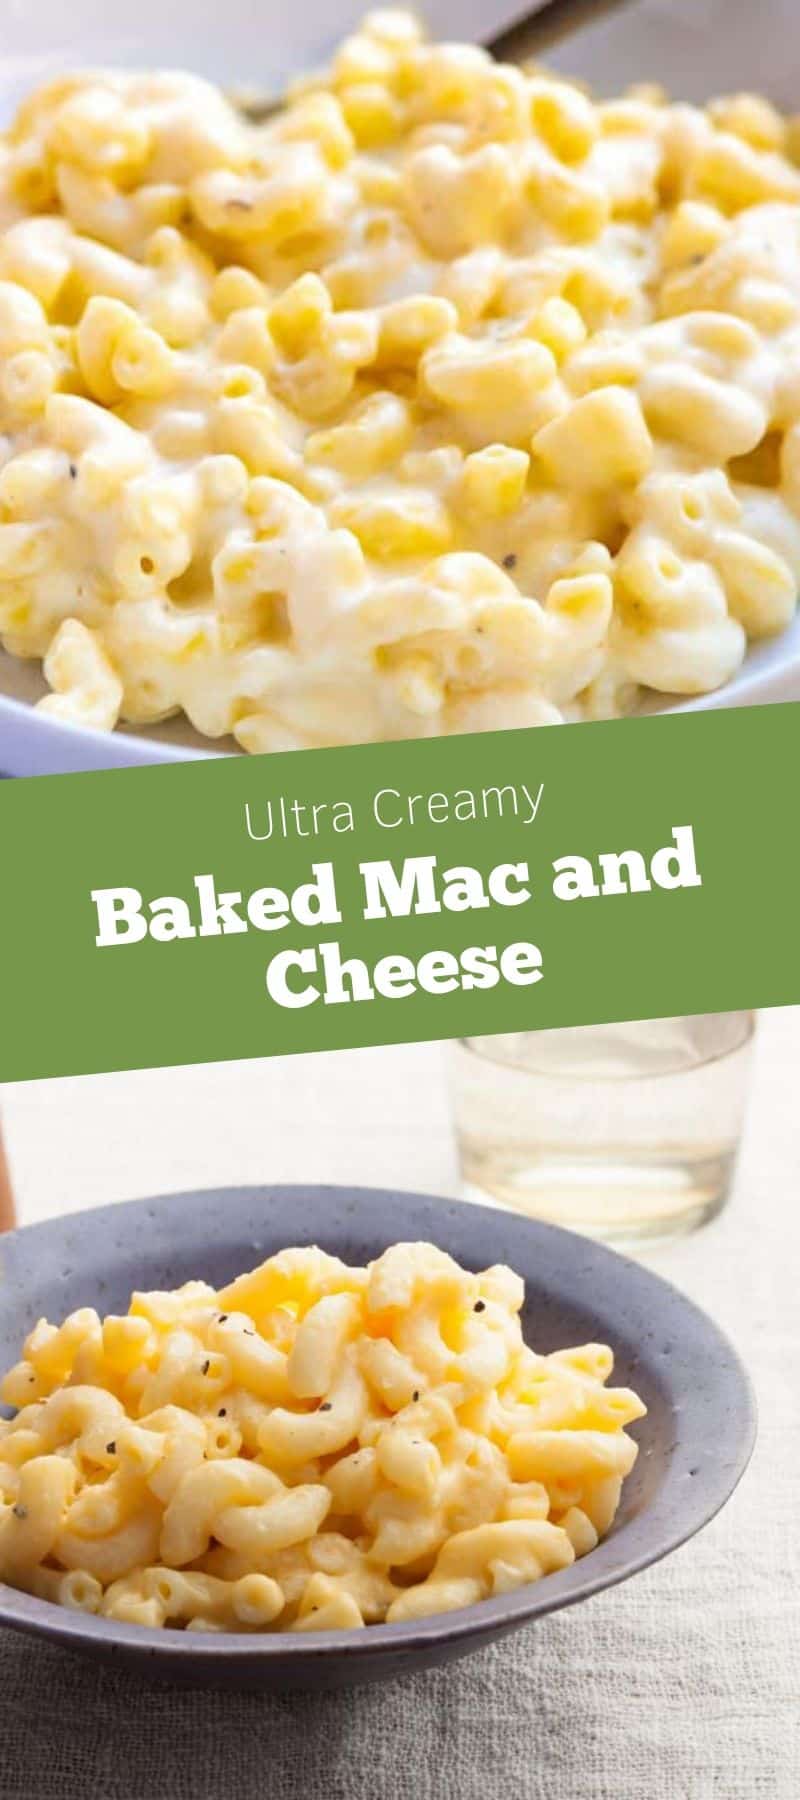 Ultra Creamy Baked Mac and Cheese 2